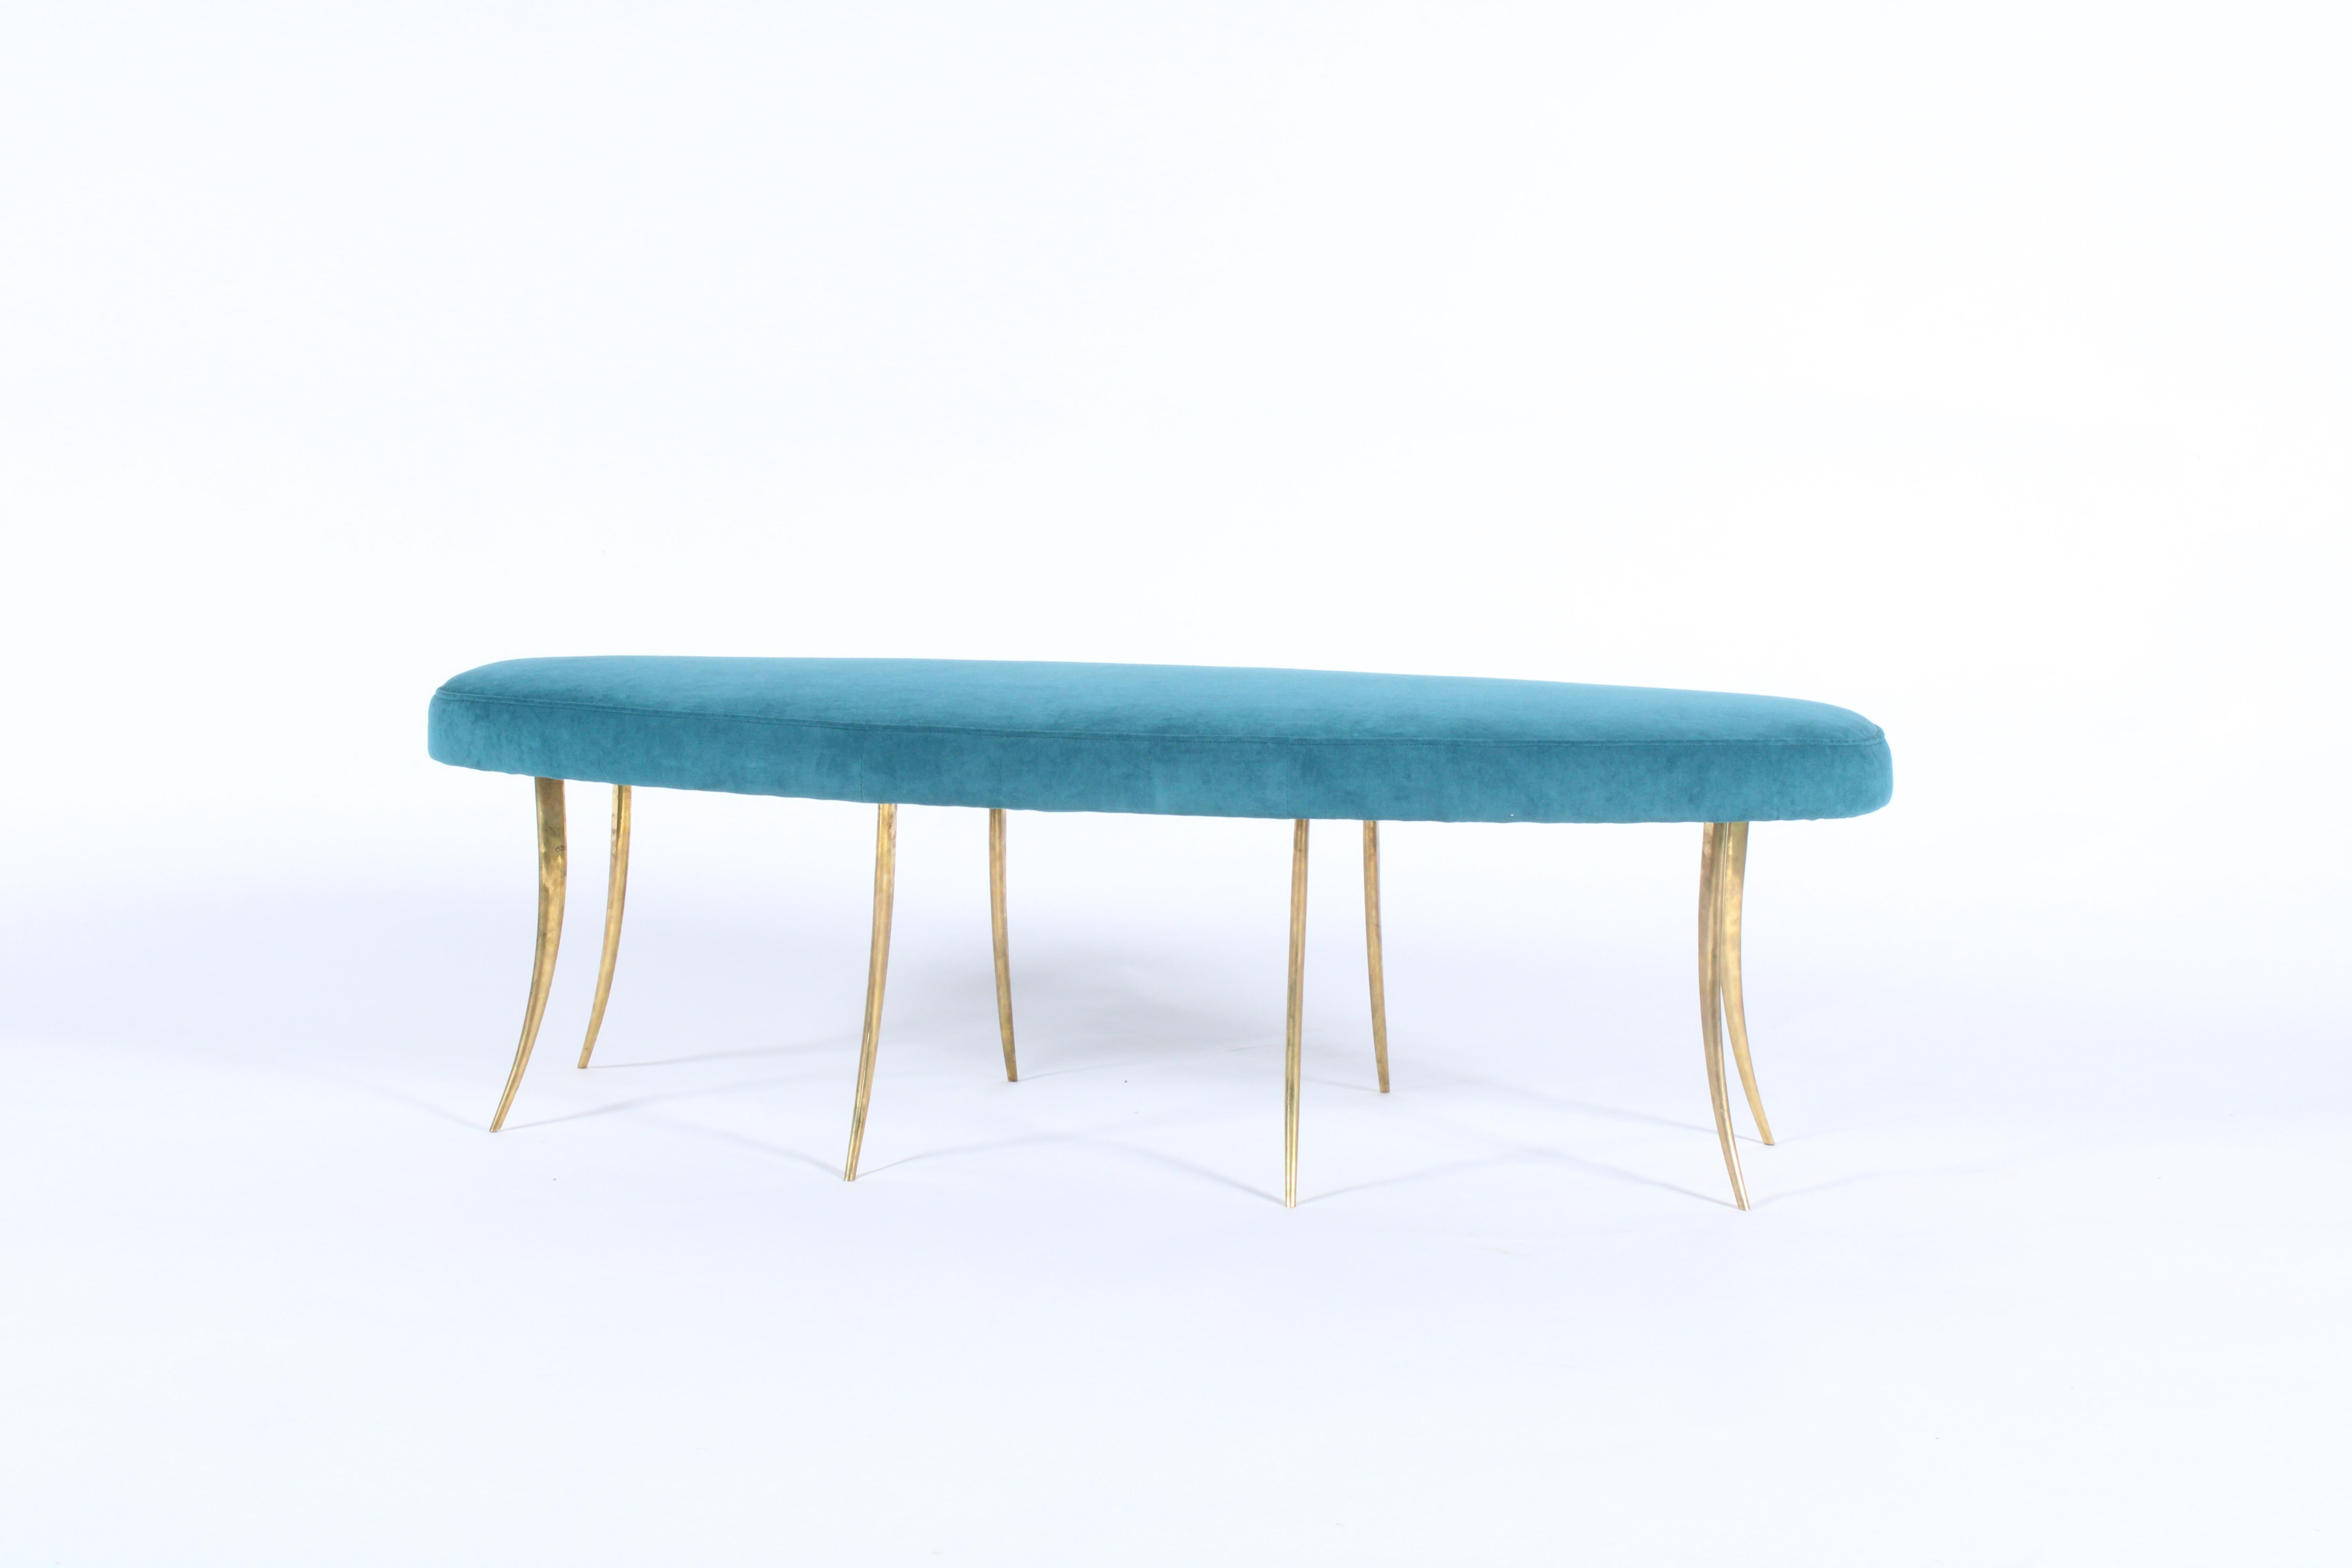 A striking bespoke bench rich in design and Italian style. A newly upholstered luxurious cushion in teal fabric sits atop eight curved brass feet which have a wonderful vintage patina.. This is a unique piece and will work superbly in a wide variety